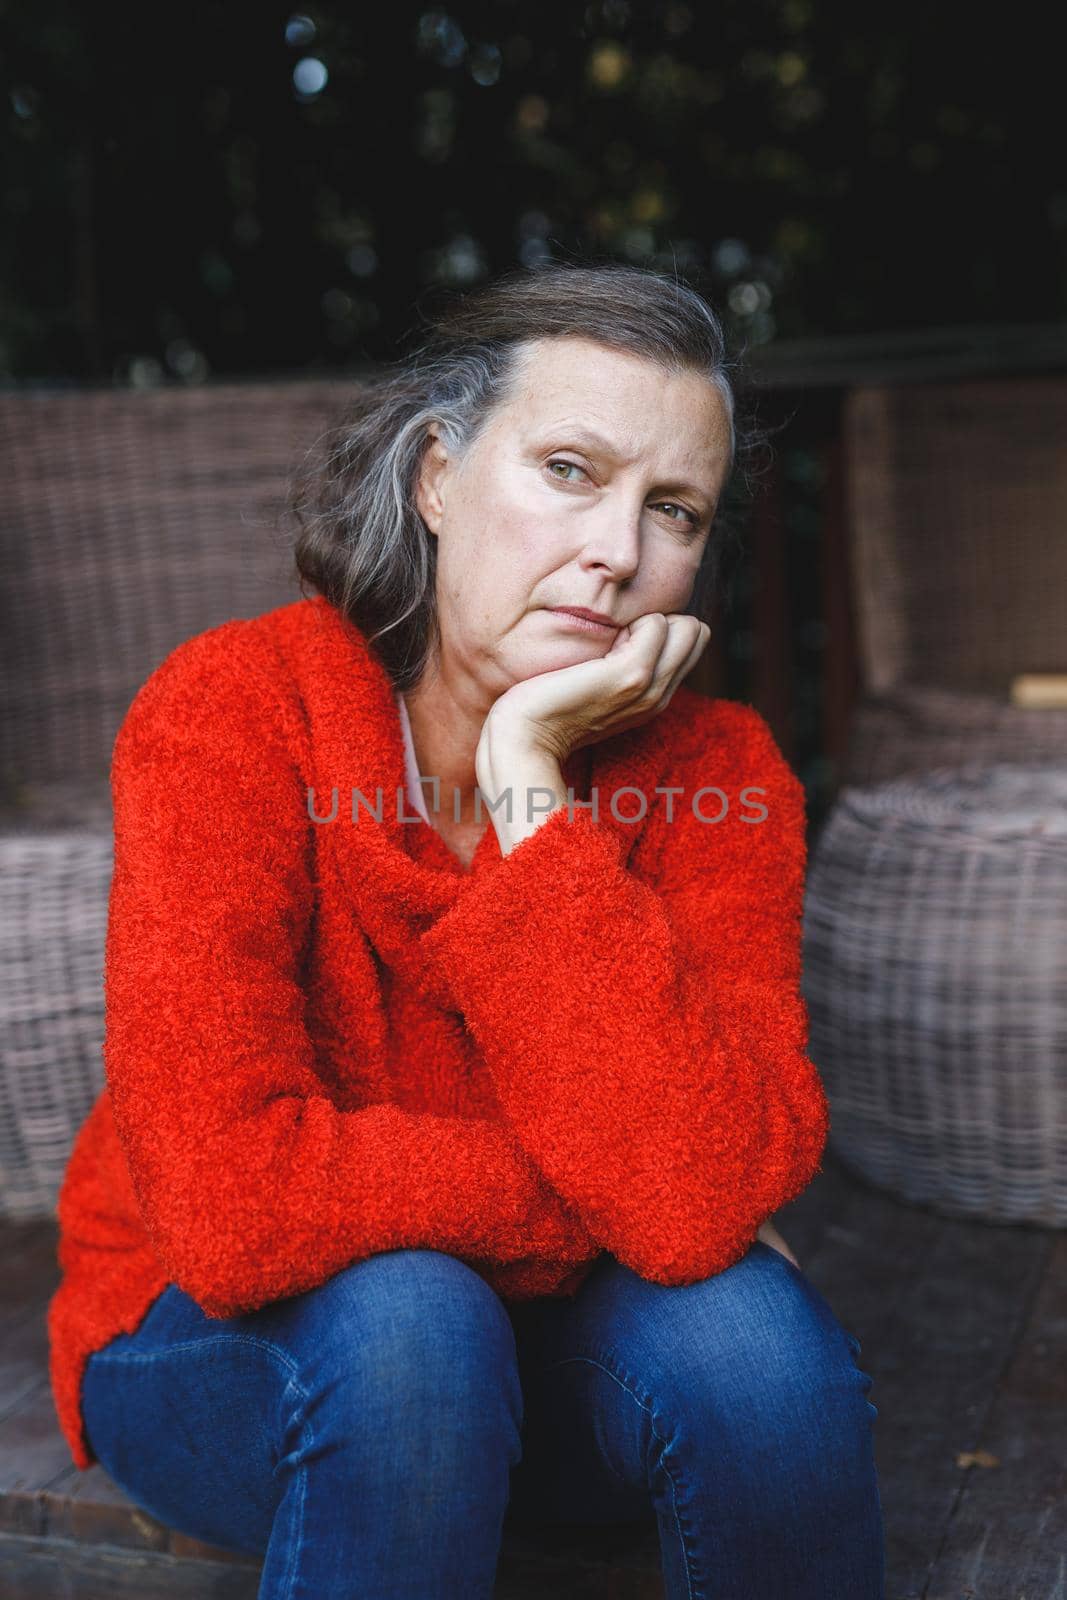 Thoughtful senior caucasian woman sitting and looking away in garden. retirement lifestyle, spending time alone at home.